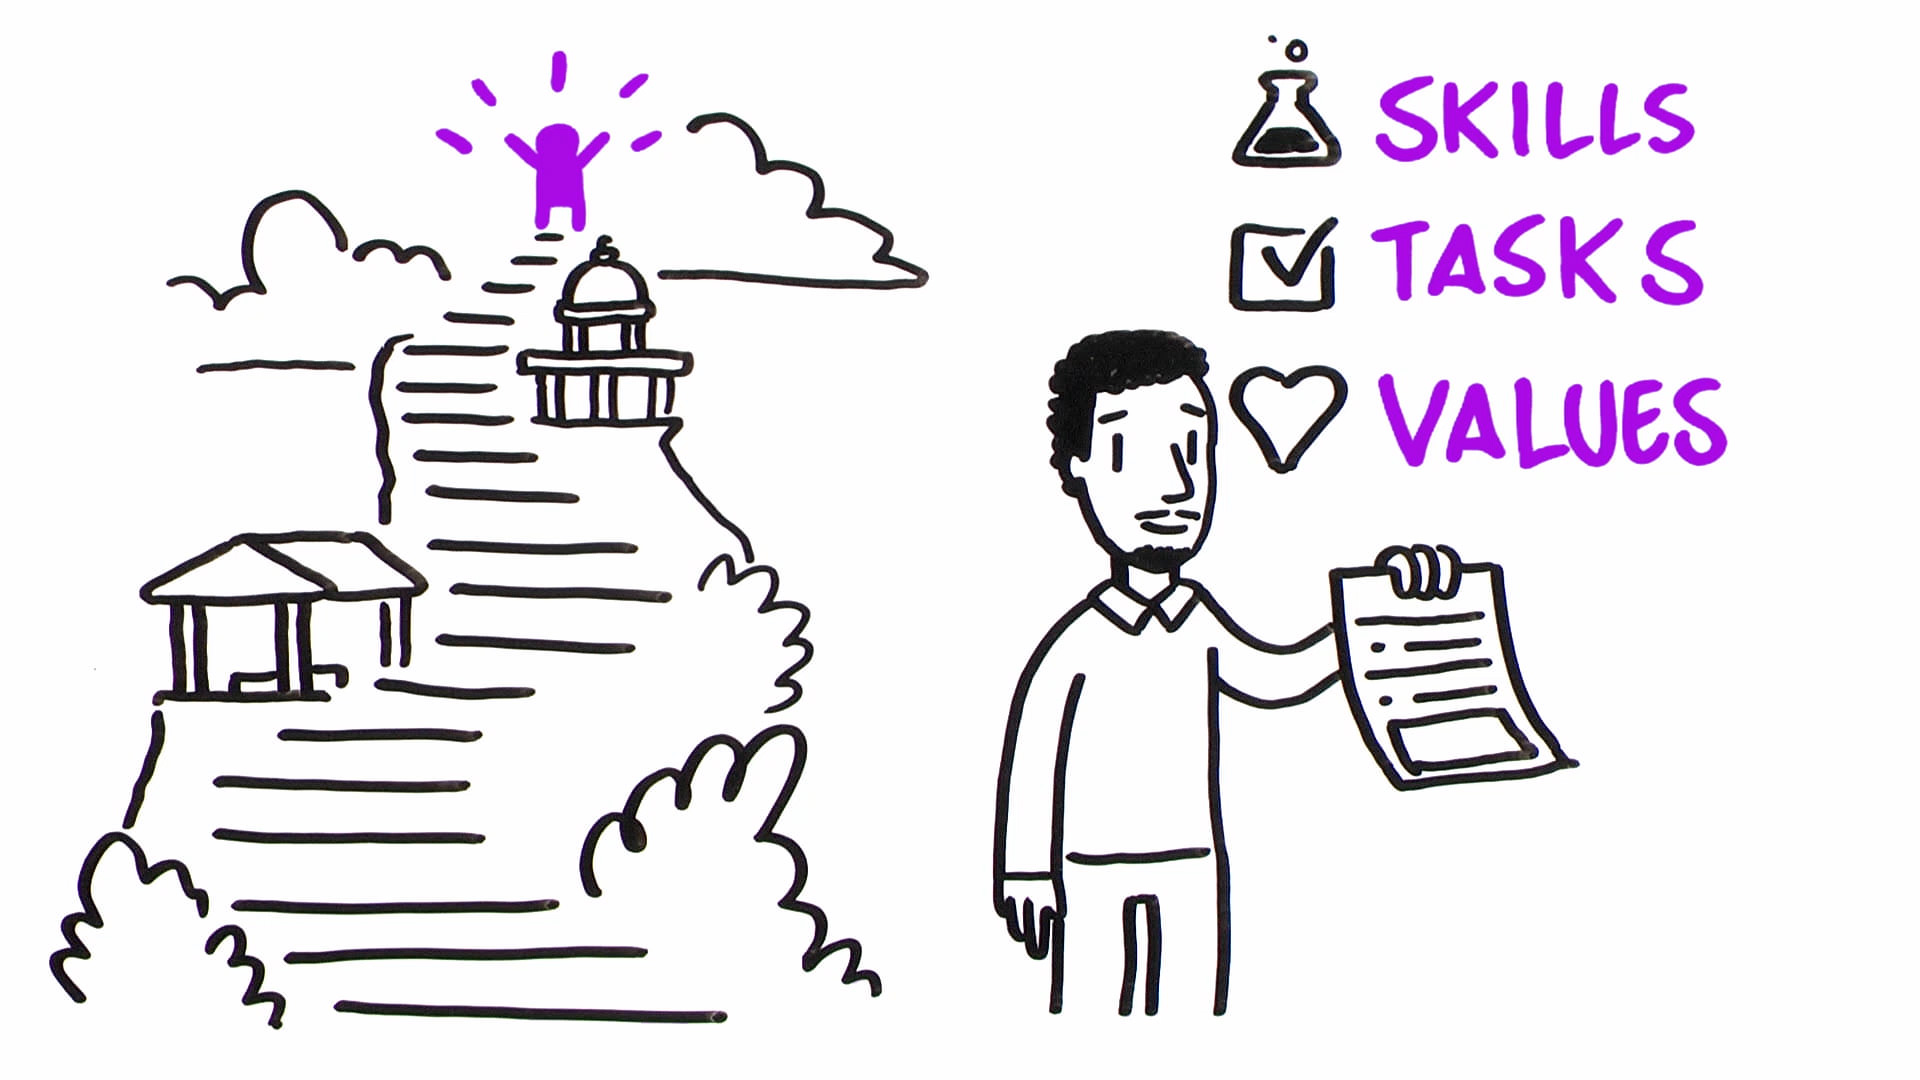 Illustration of a trainee reaching their goals and listing their skills, tasks and values.